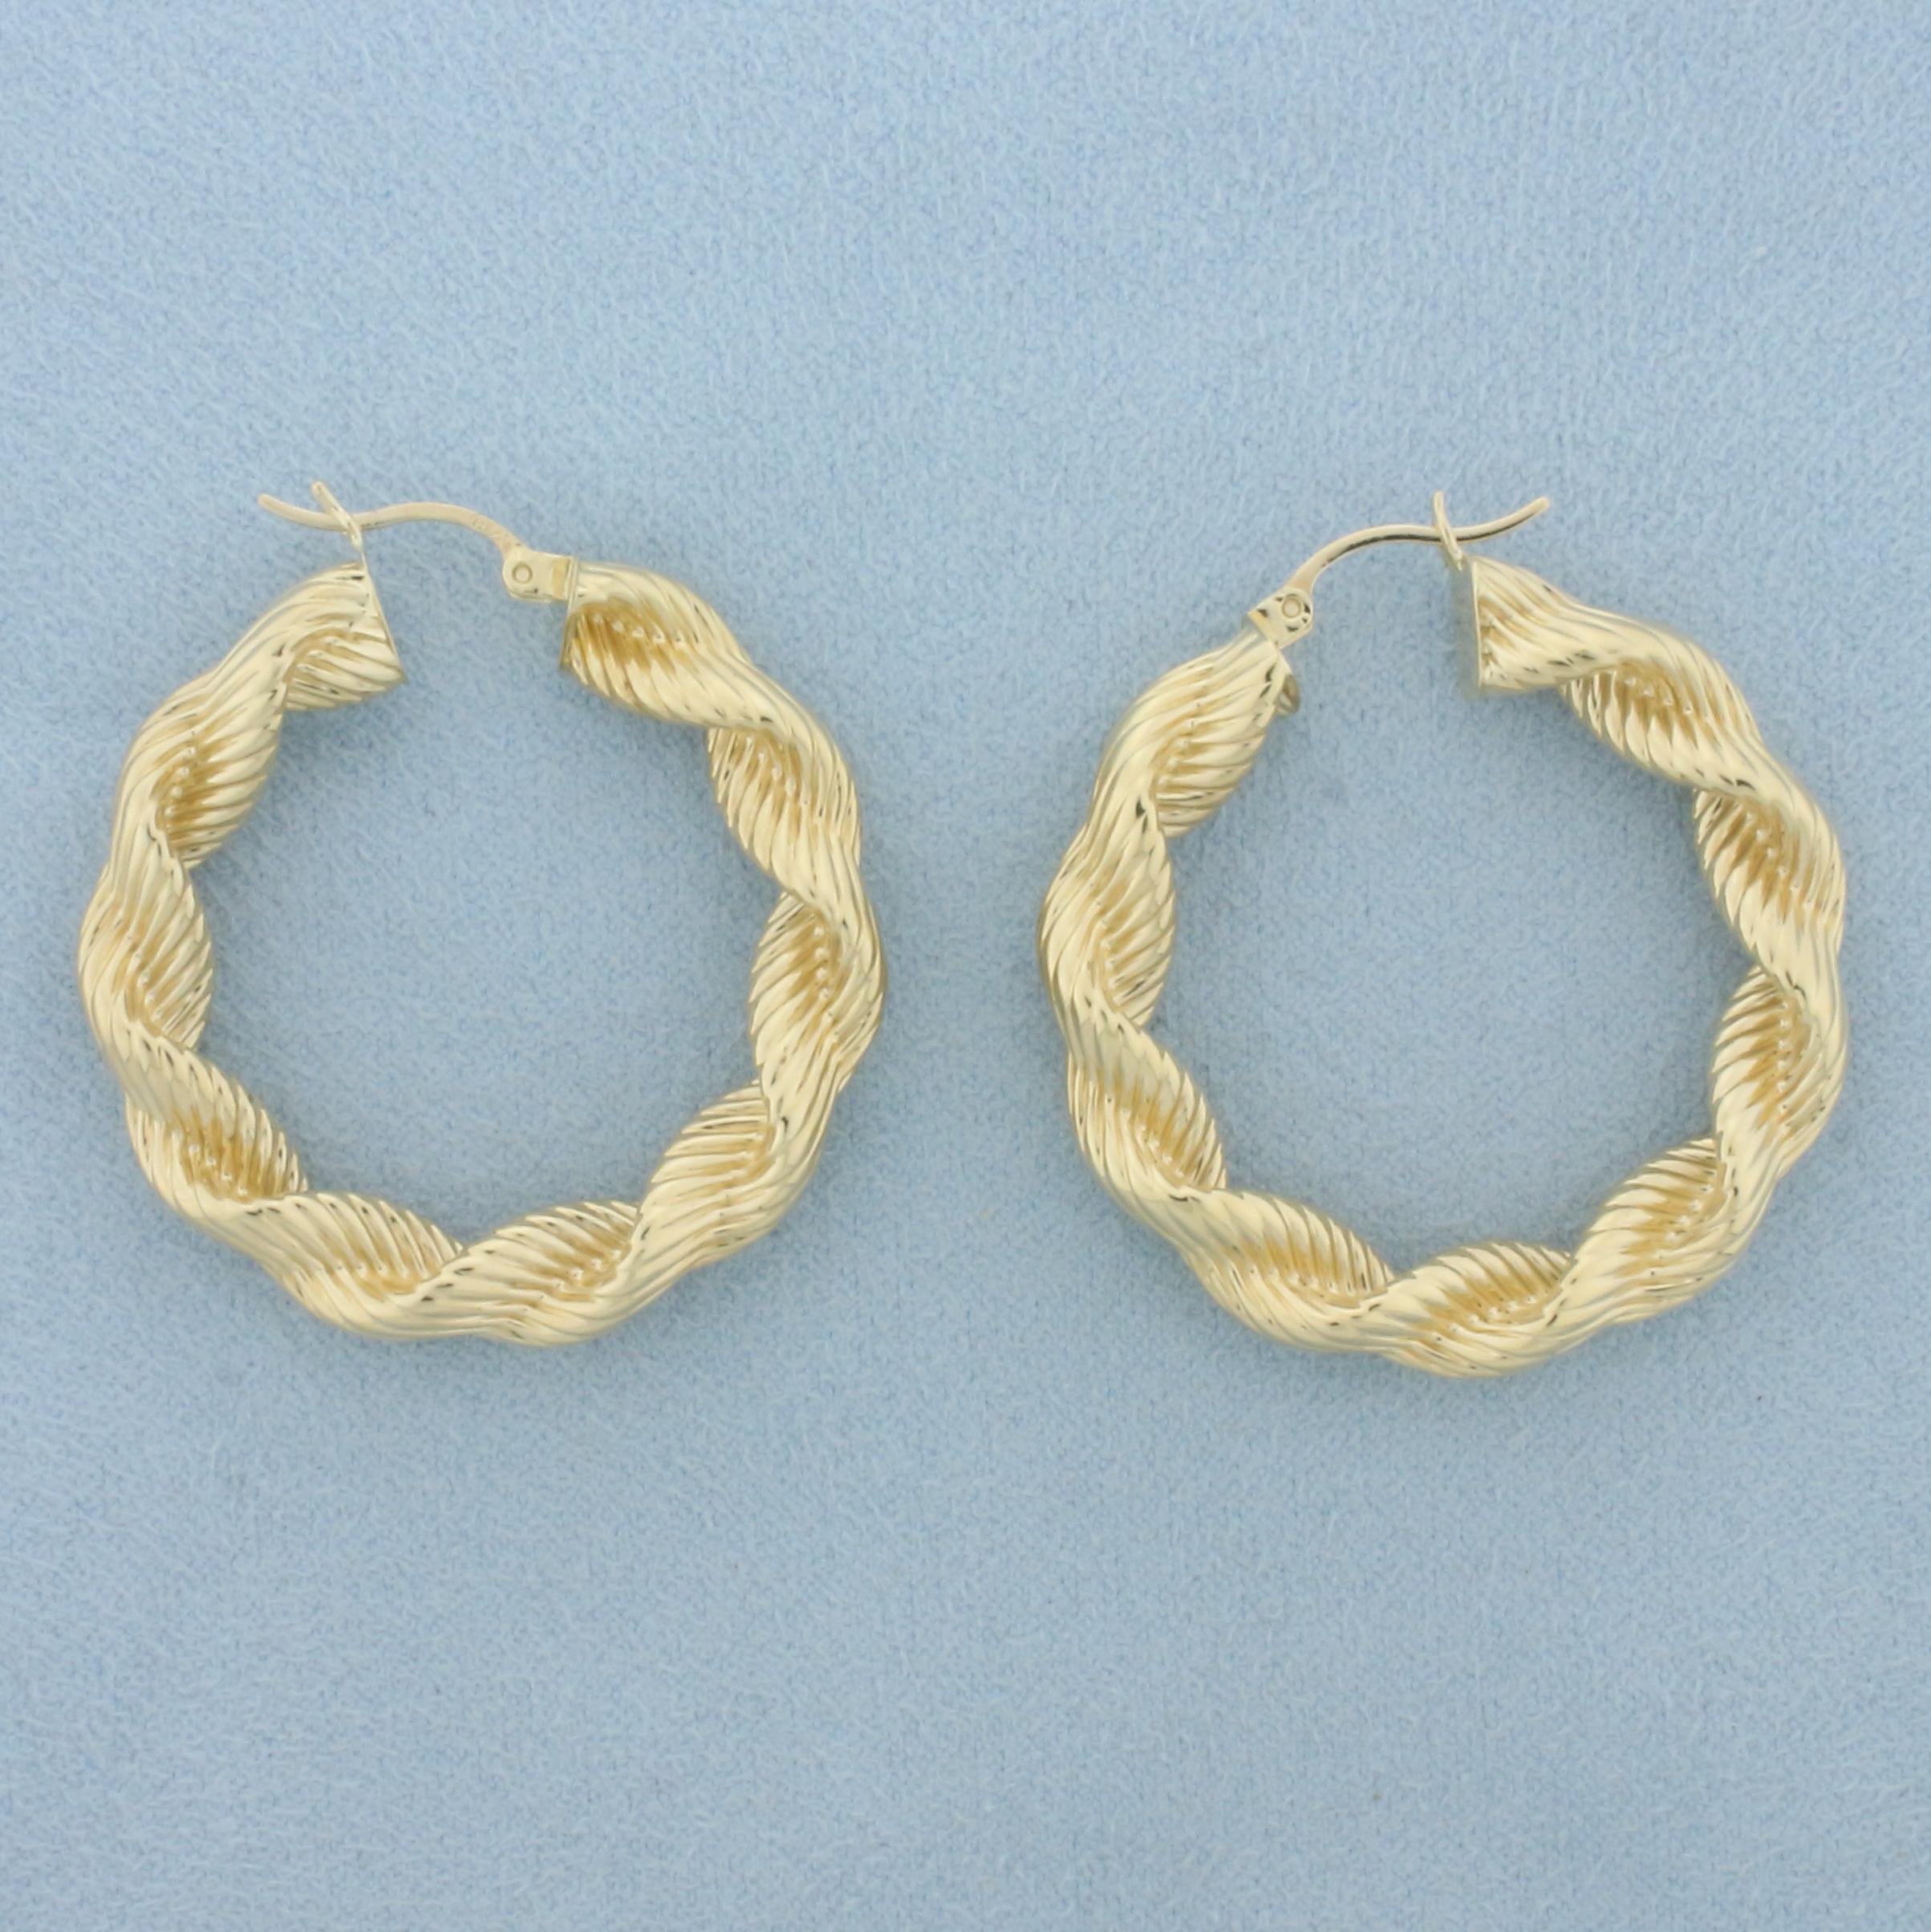 Thick Twisting Rope Design Hoop Earrings In 14k Yellow Gold